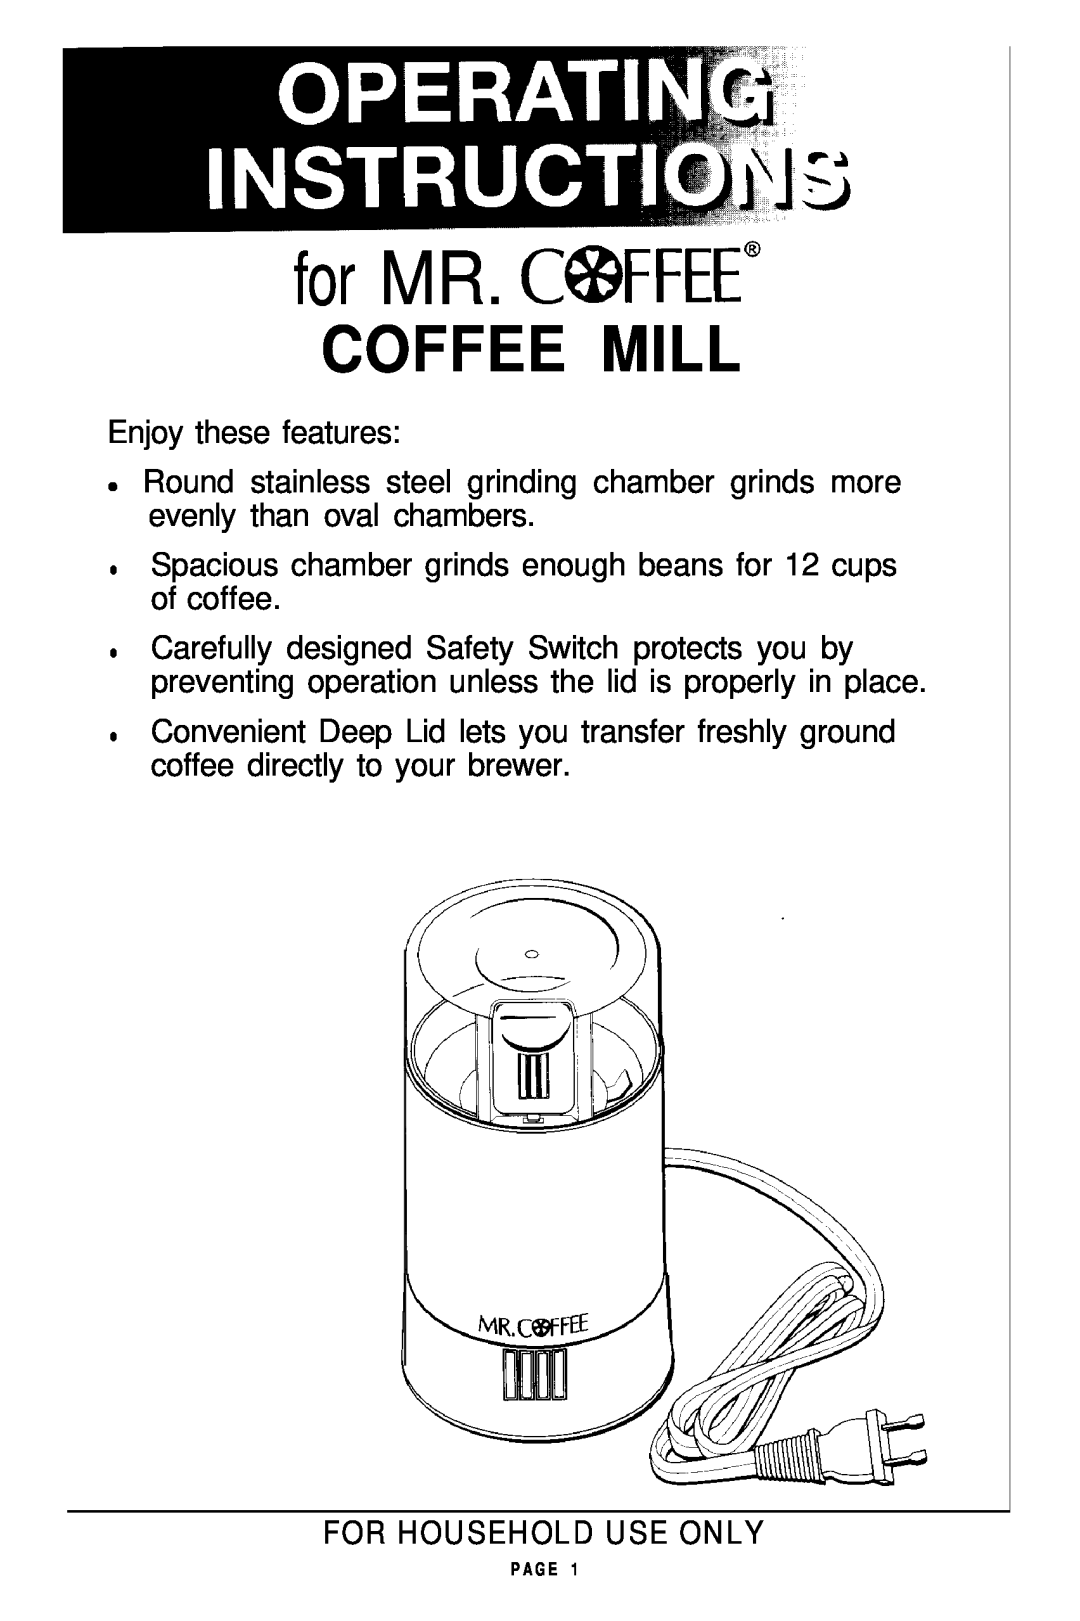 Mr. Coffee COFFEE MILL manual for MR. COFFEE”, Coffee Mill, For Household Use Only 